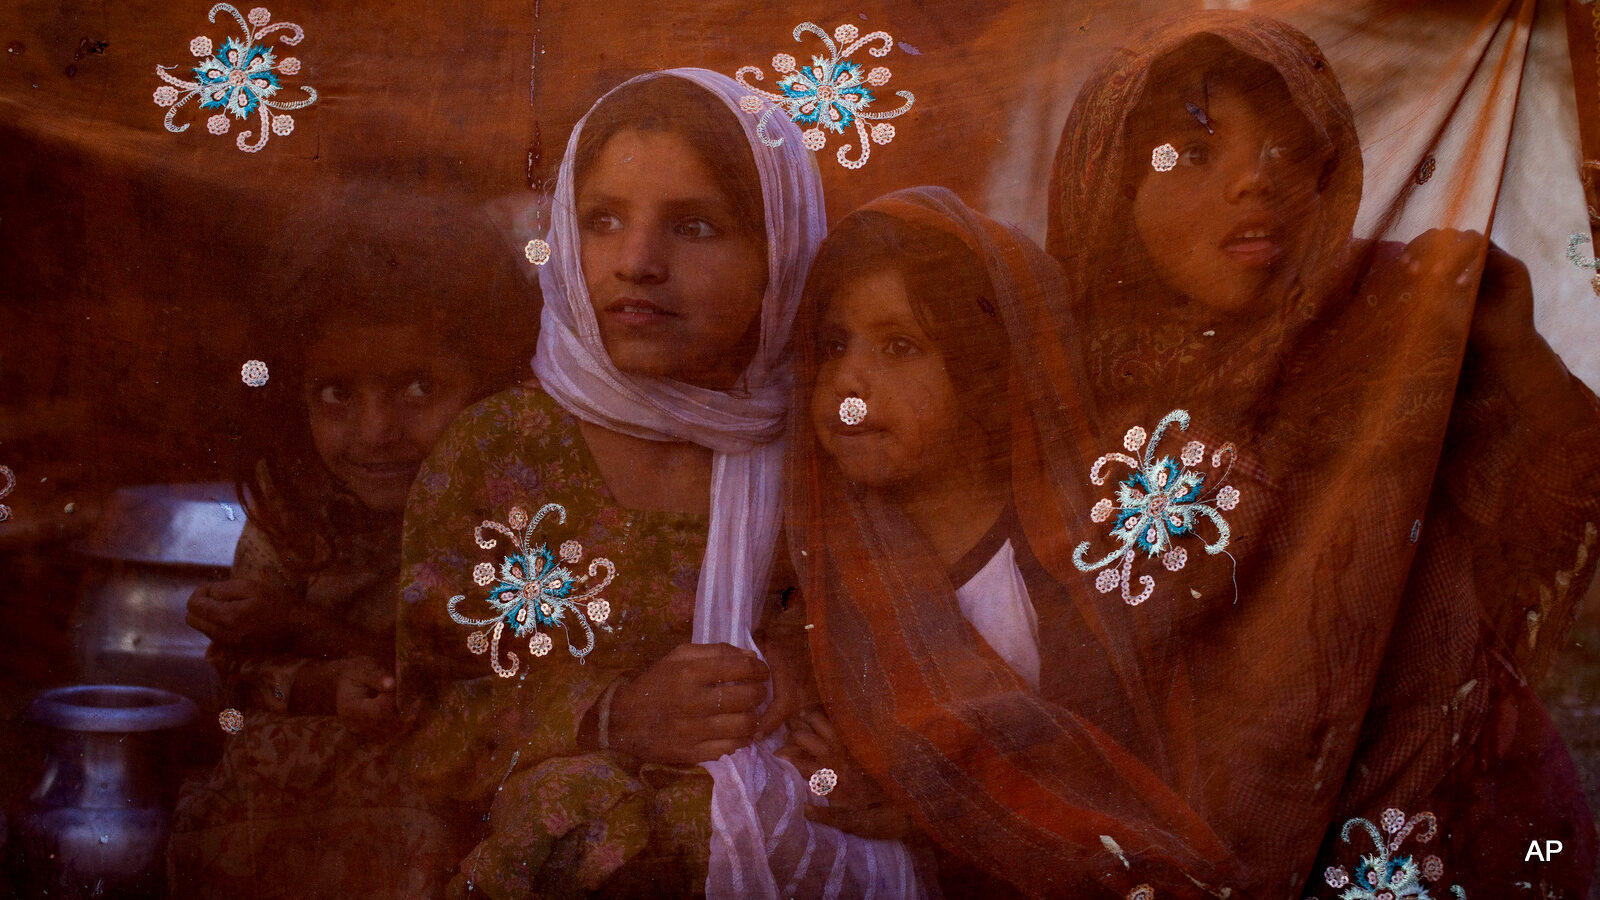 Bakarwal nomad children are seen through a veil that covers their tent as they react to a Kashmiri man photographing them on the outskirts of Srinagar, Indian controlled Kashmir, Tuesday, April 21, 2015. Bakarwals are nomadic herders of Jammu Kashmir state who wander in search of good pastures for their cattle. (AP Photo/Dar Yasin)